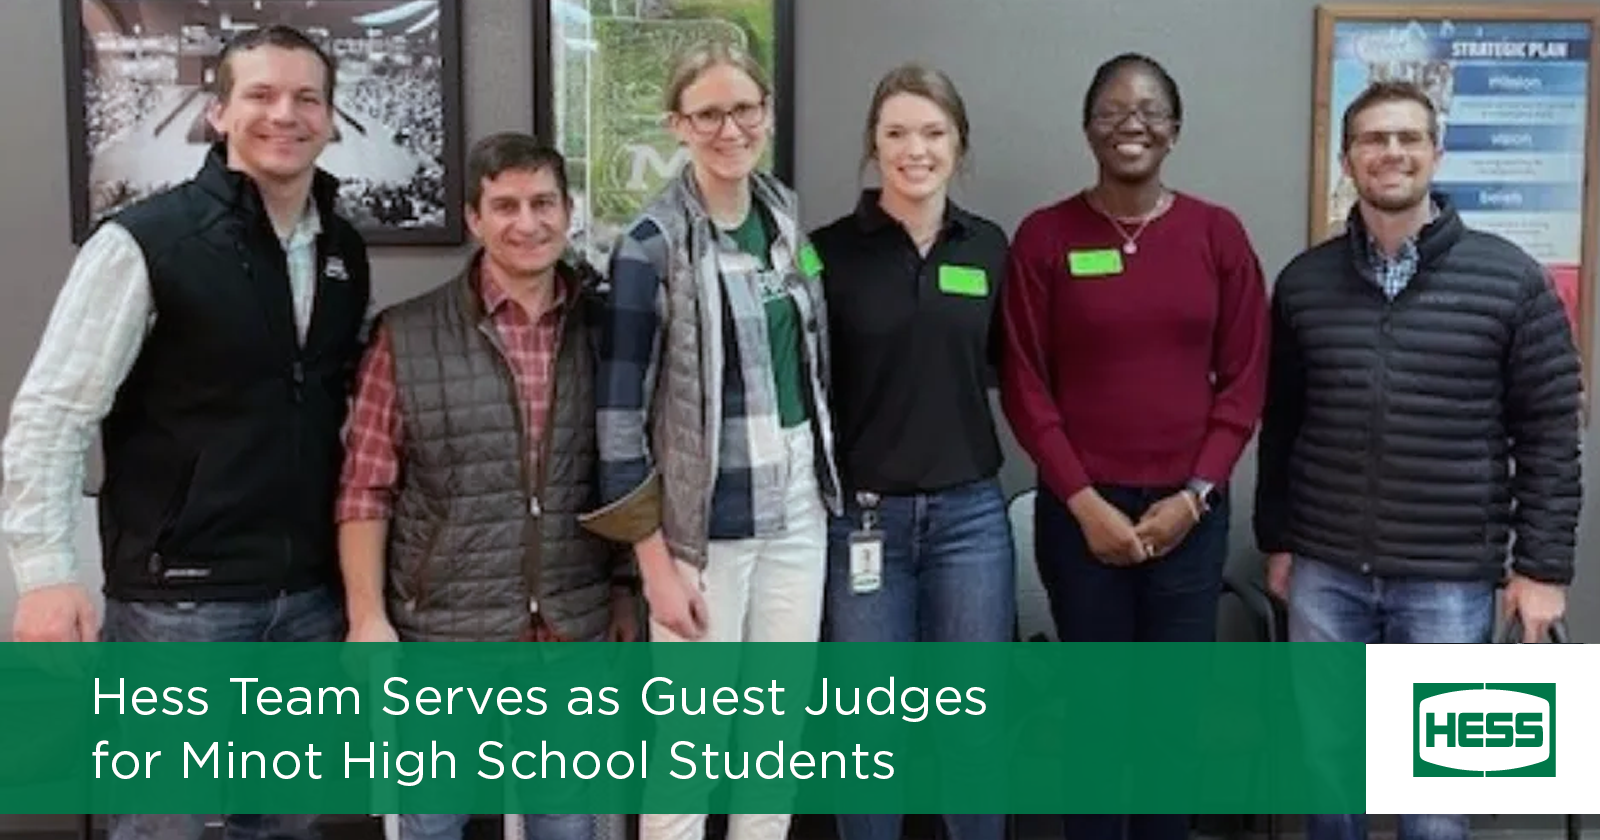 Hess Team Serves as Guest Judges for FBLA Students